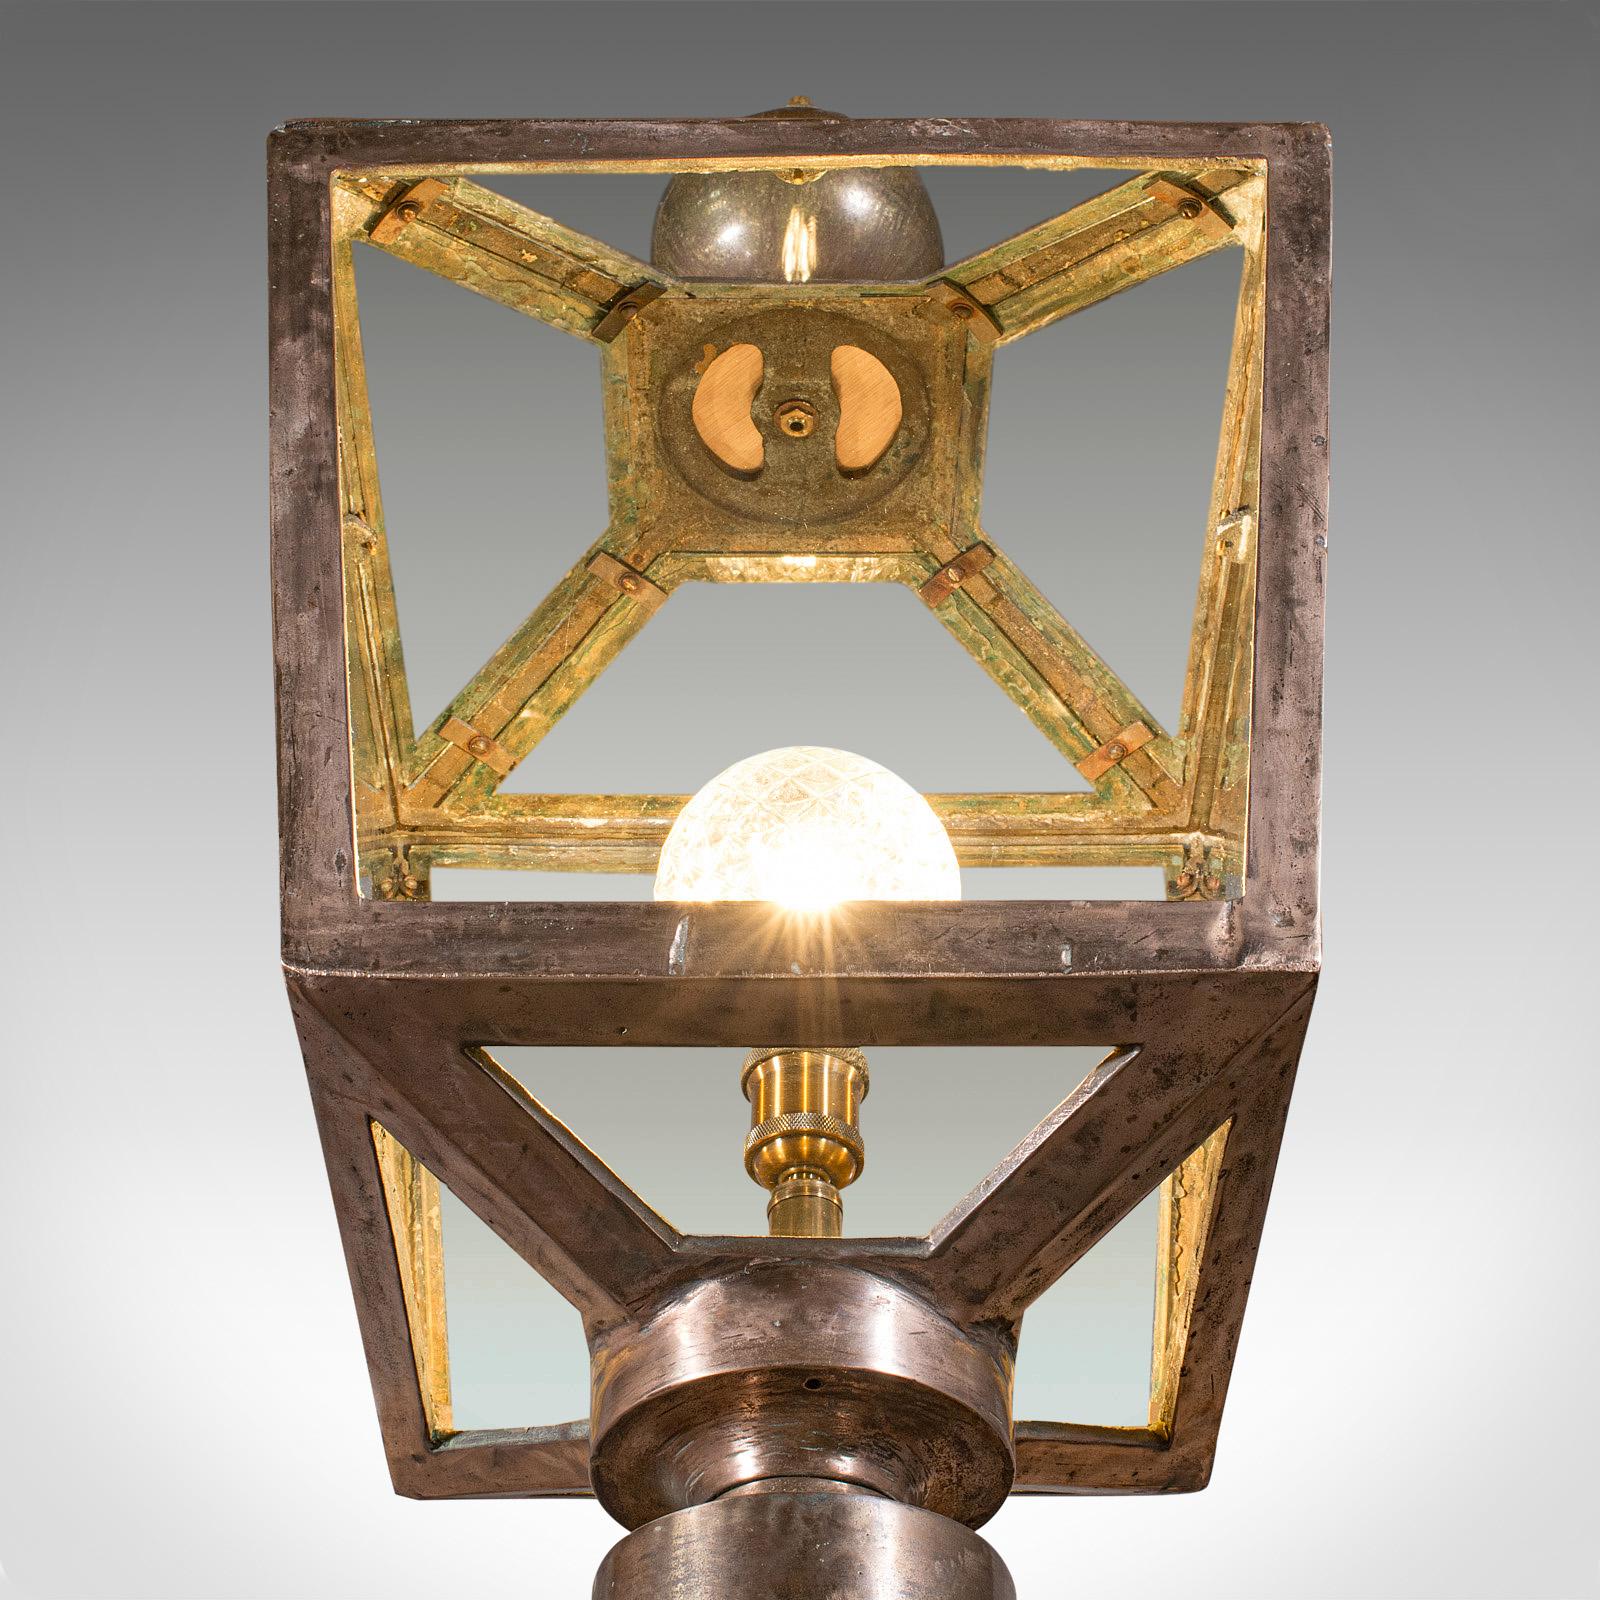 Large Antique Courtyard Light, English, Bronze, Outdoor Lamp, Victorian, C.1870 For Sale 1